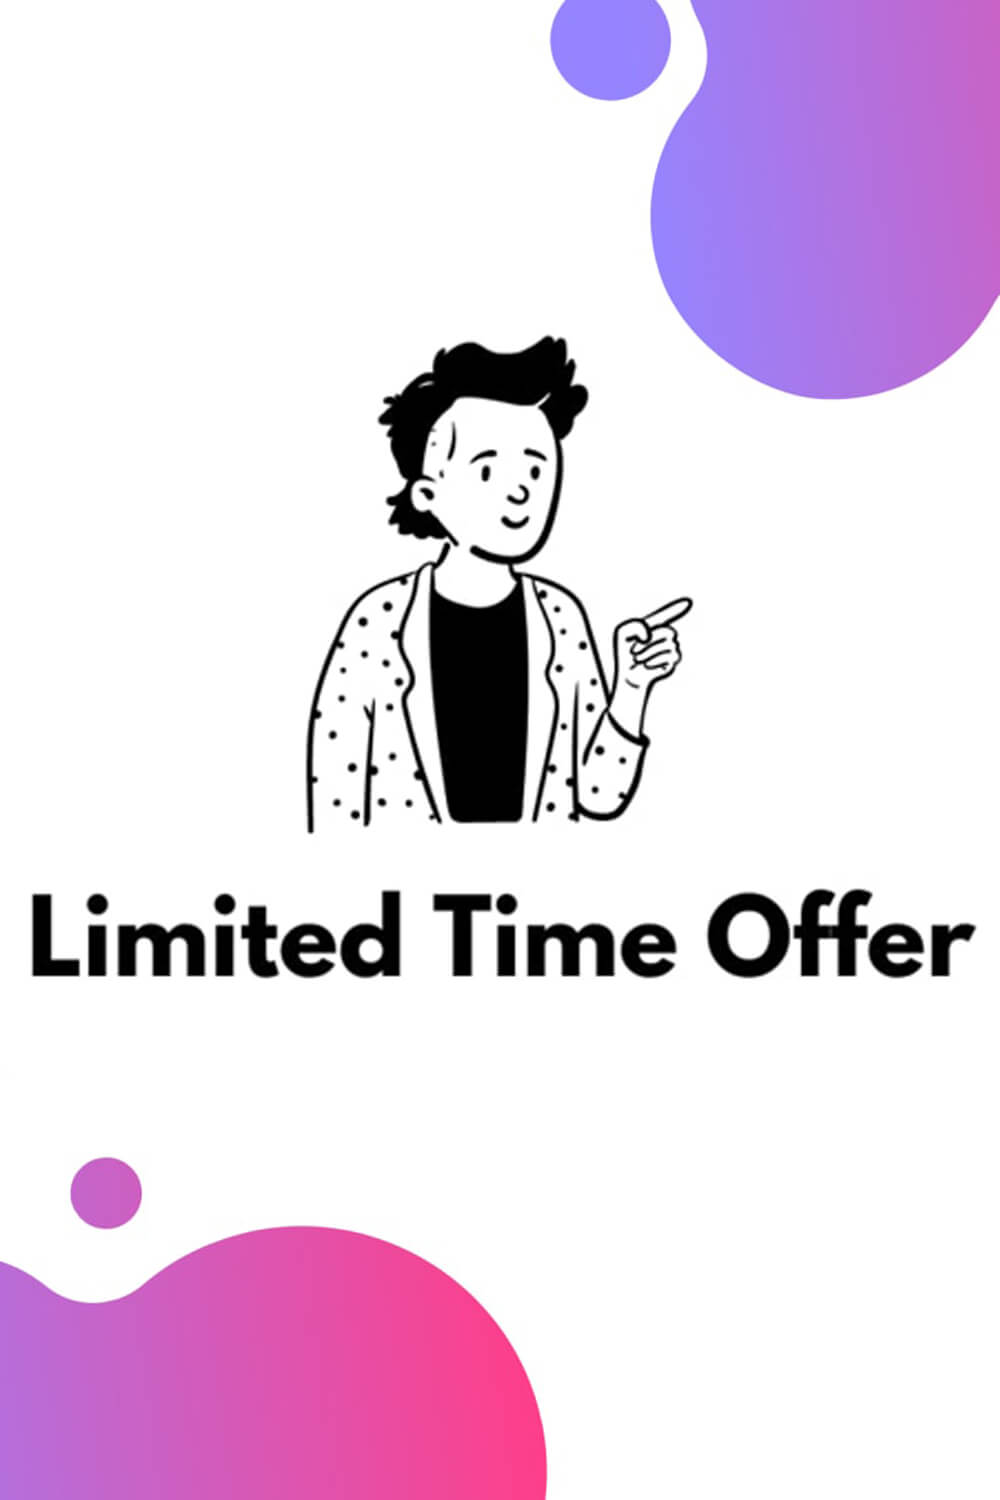 Drawing of a man in a polka dot jacket who draws attention to the fact that time is limited offer.